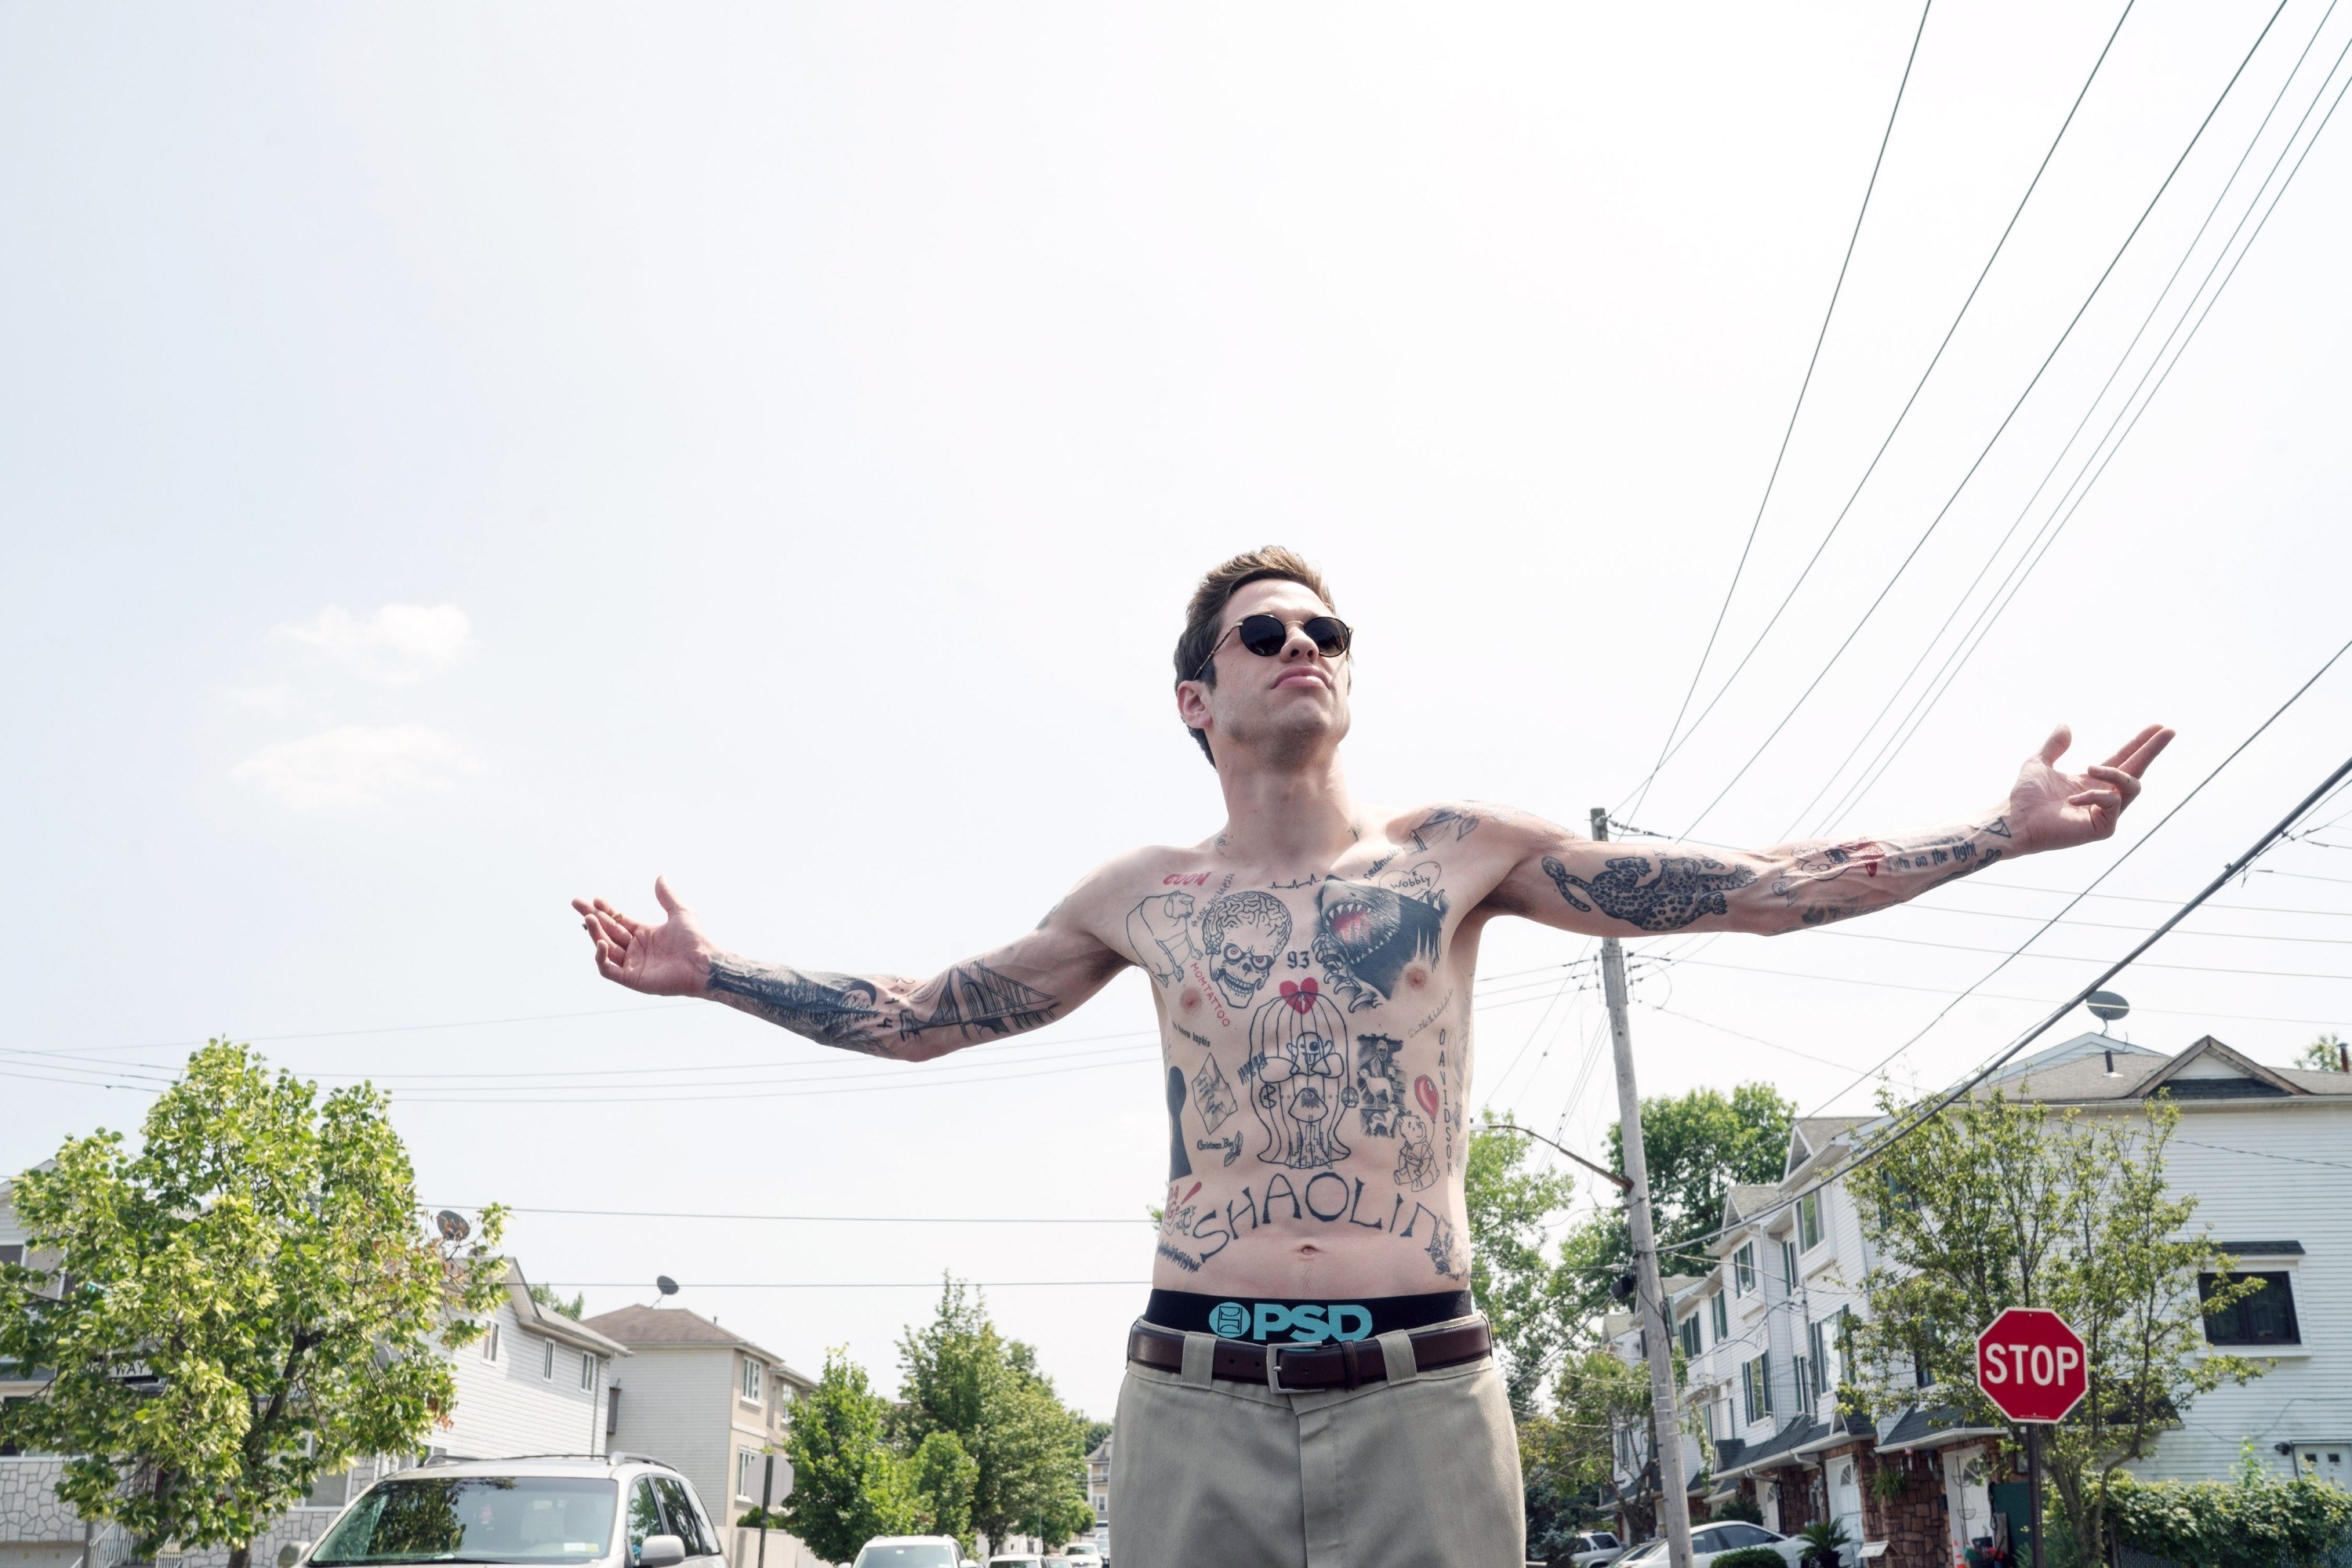 A shirtless Pete with many tattoos standing outside with his arms outstretched